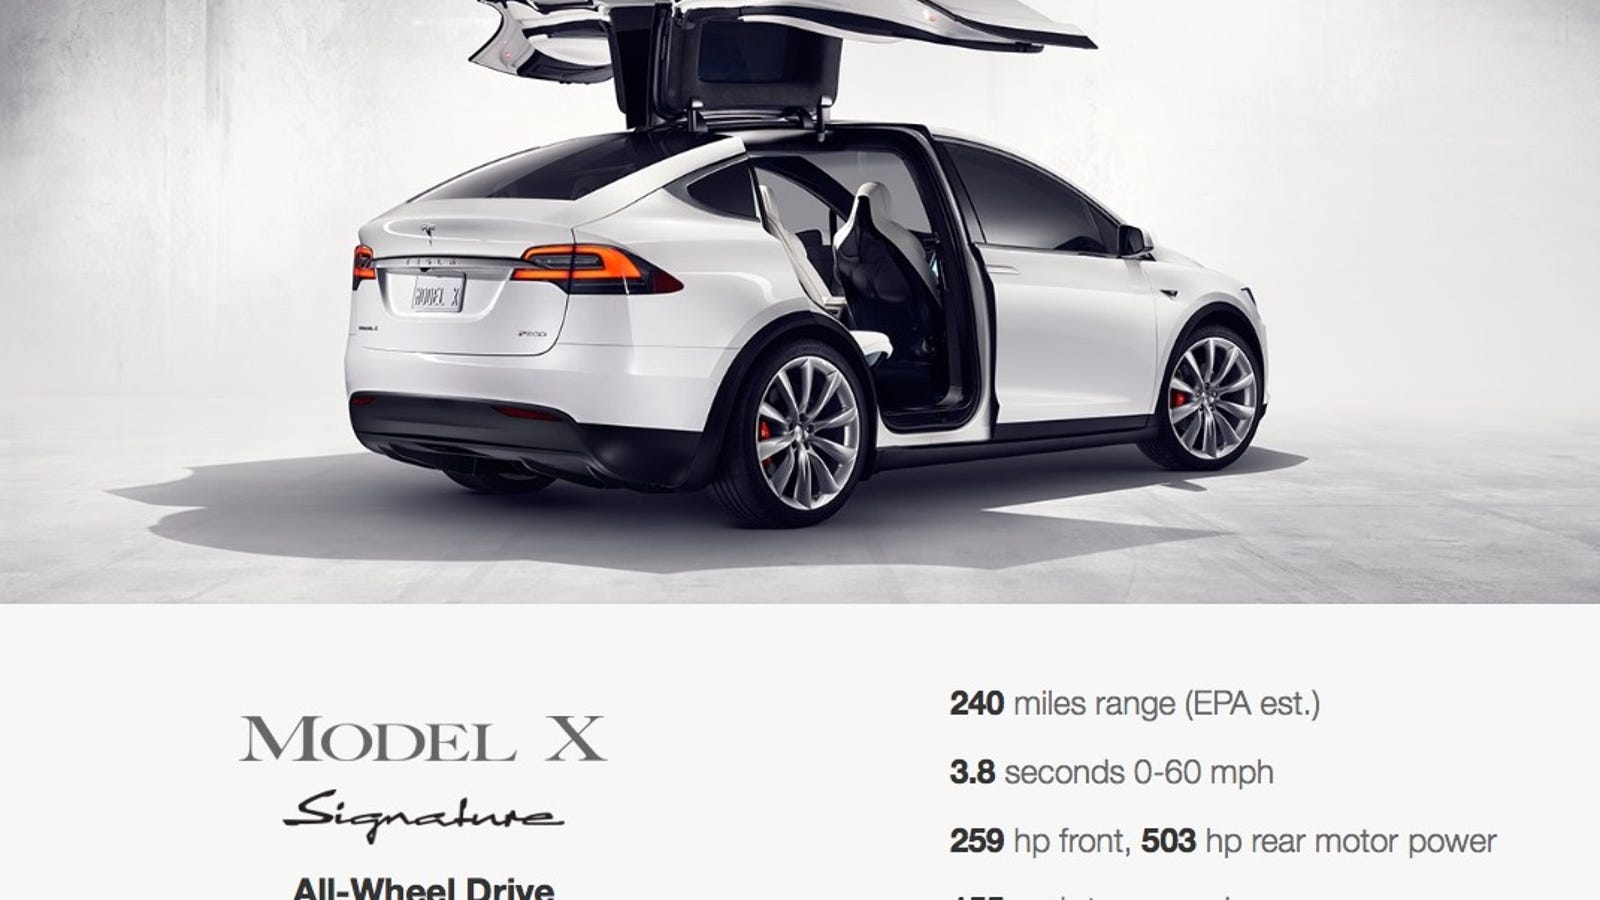 The Tesla Model X Does 0 To 60 MPH In 3.3 Seconds, Costs Over 100,000